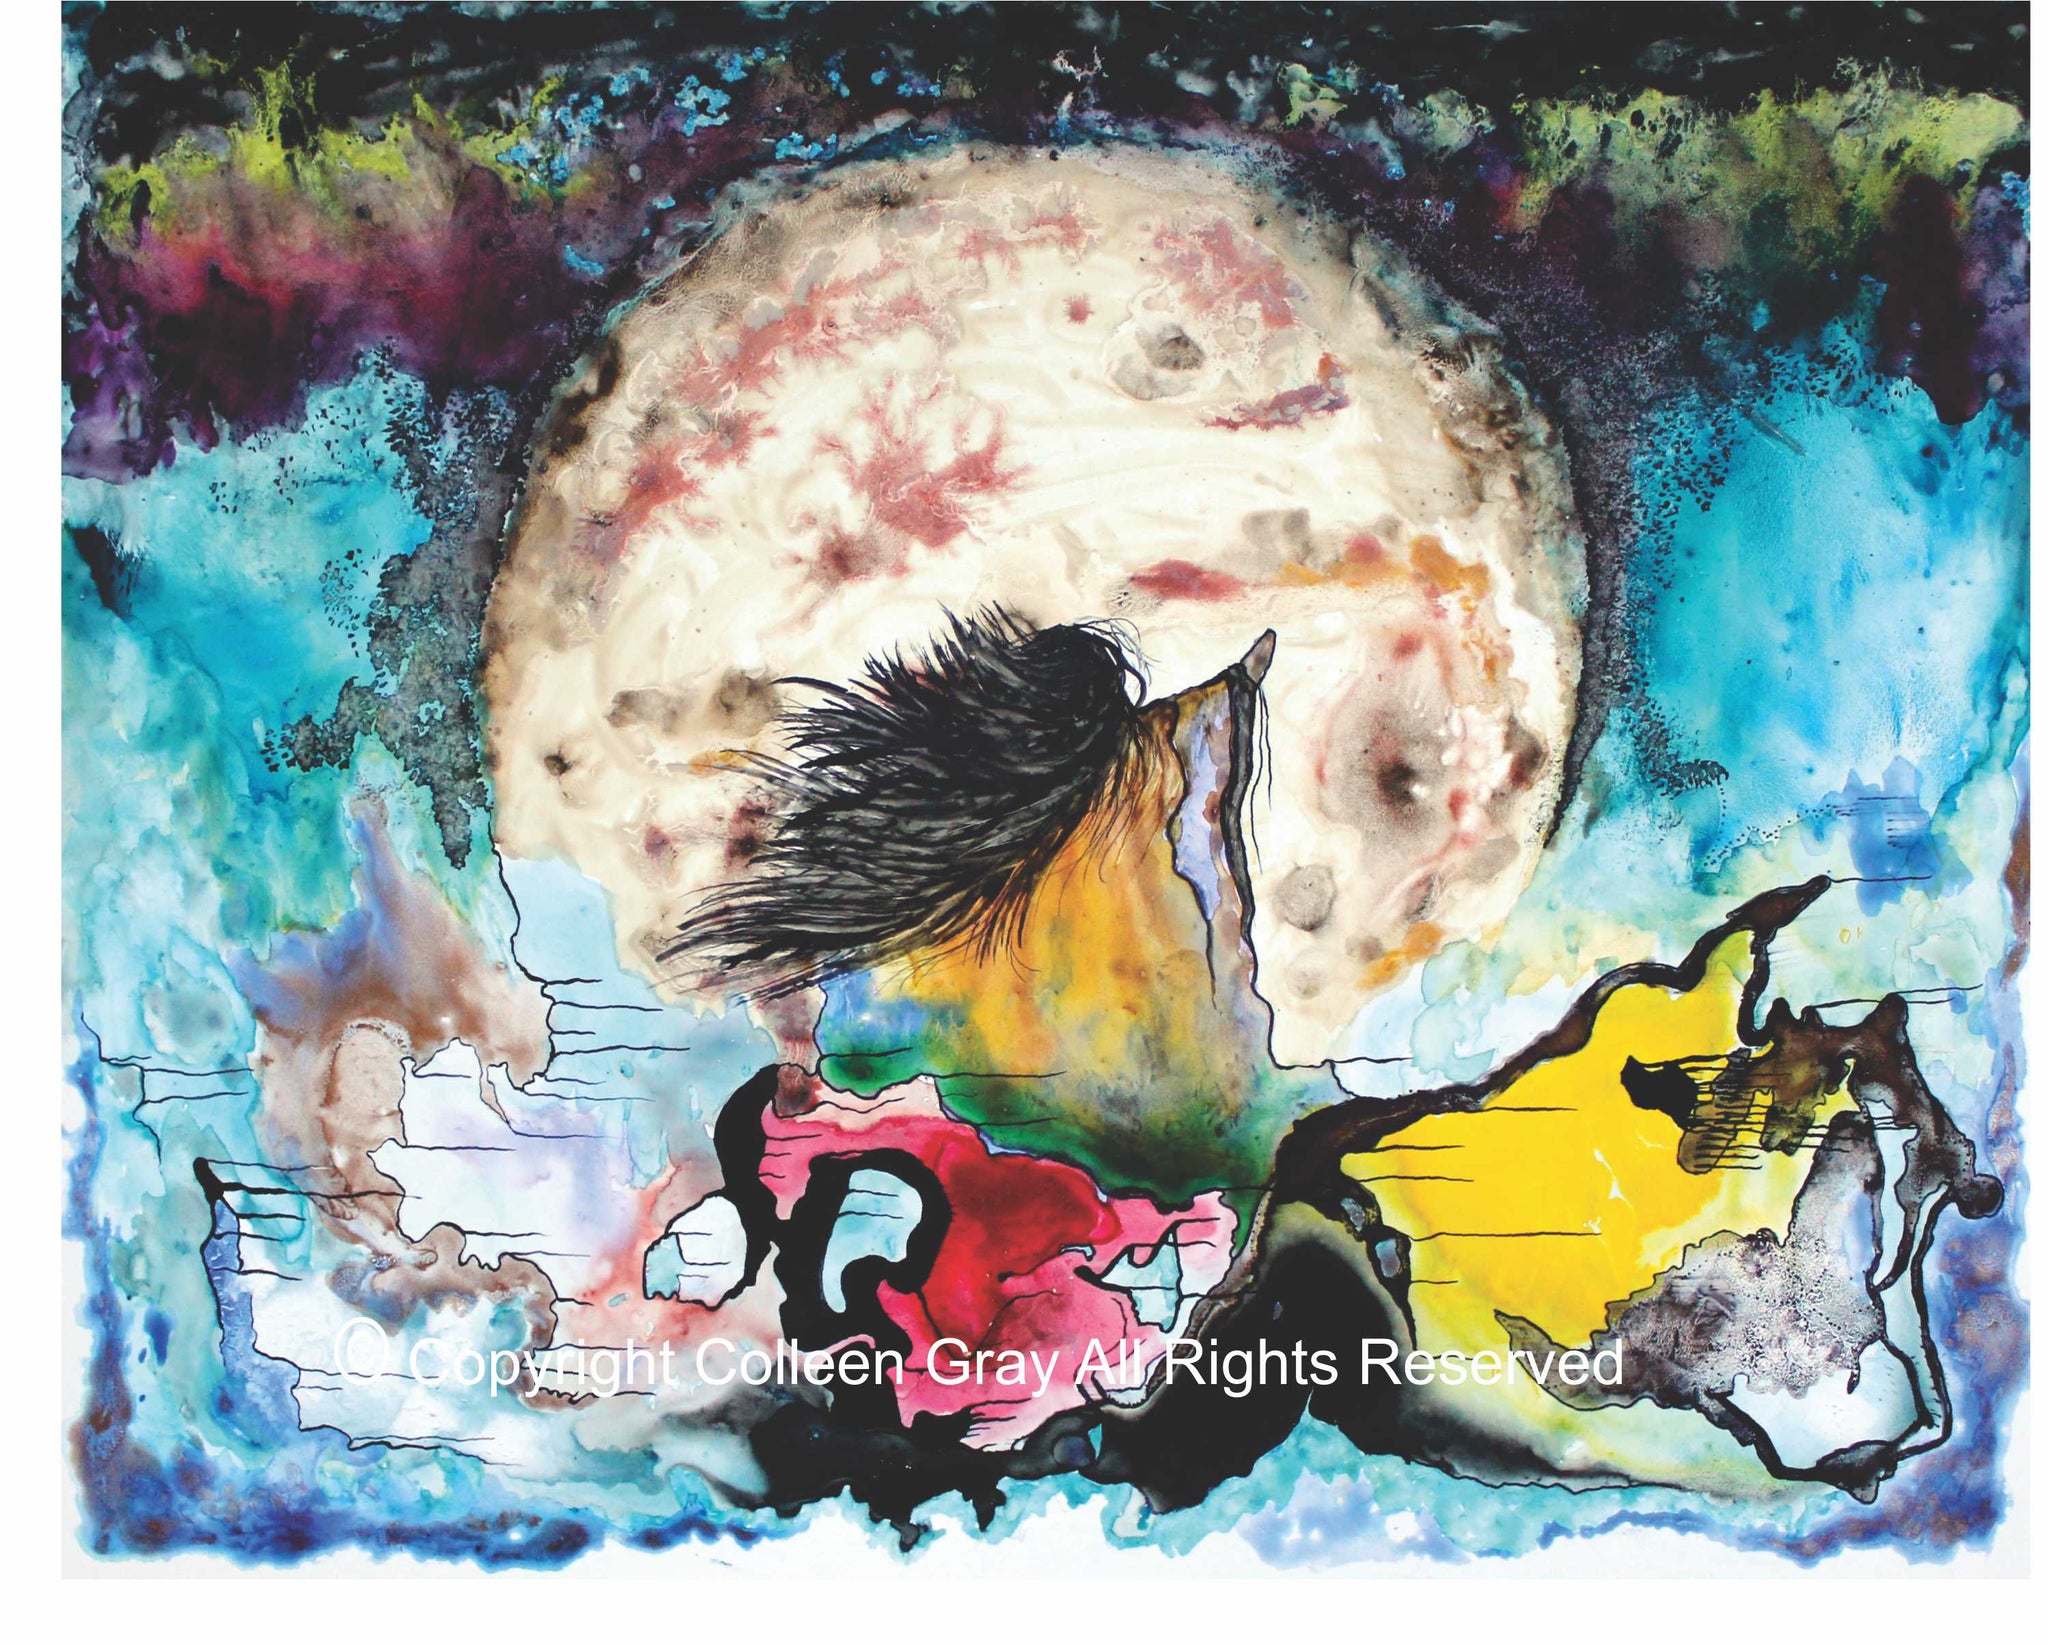 Image of Title: Wizemoon Art Card by Metis Artist Colleen Gray Indigenous Canadian Art Work. Woman with long flowing hair, outstretched arms, looking at the giant moon seeking wisdom and guidance. For sale at https://artforaidshop.ca